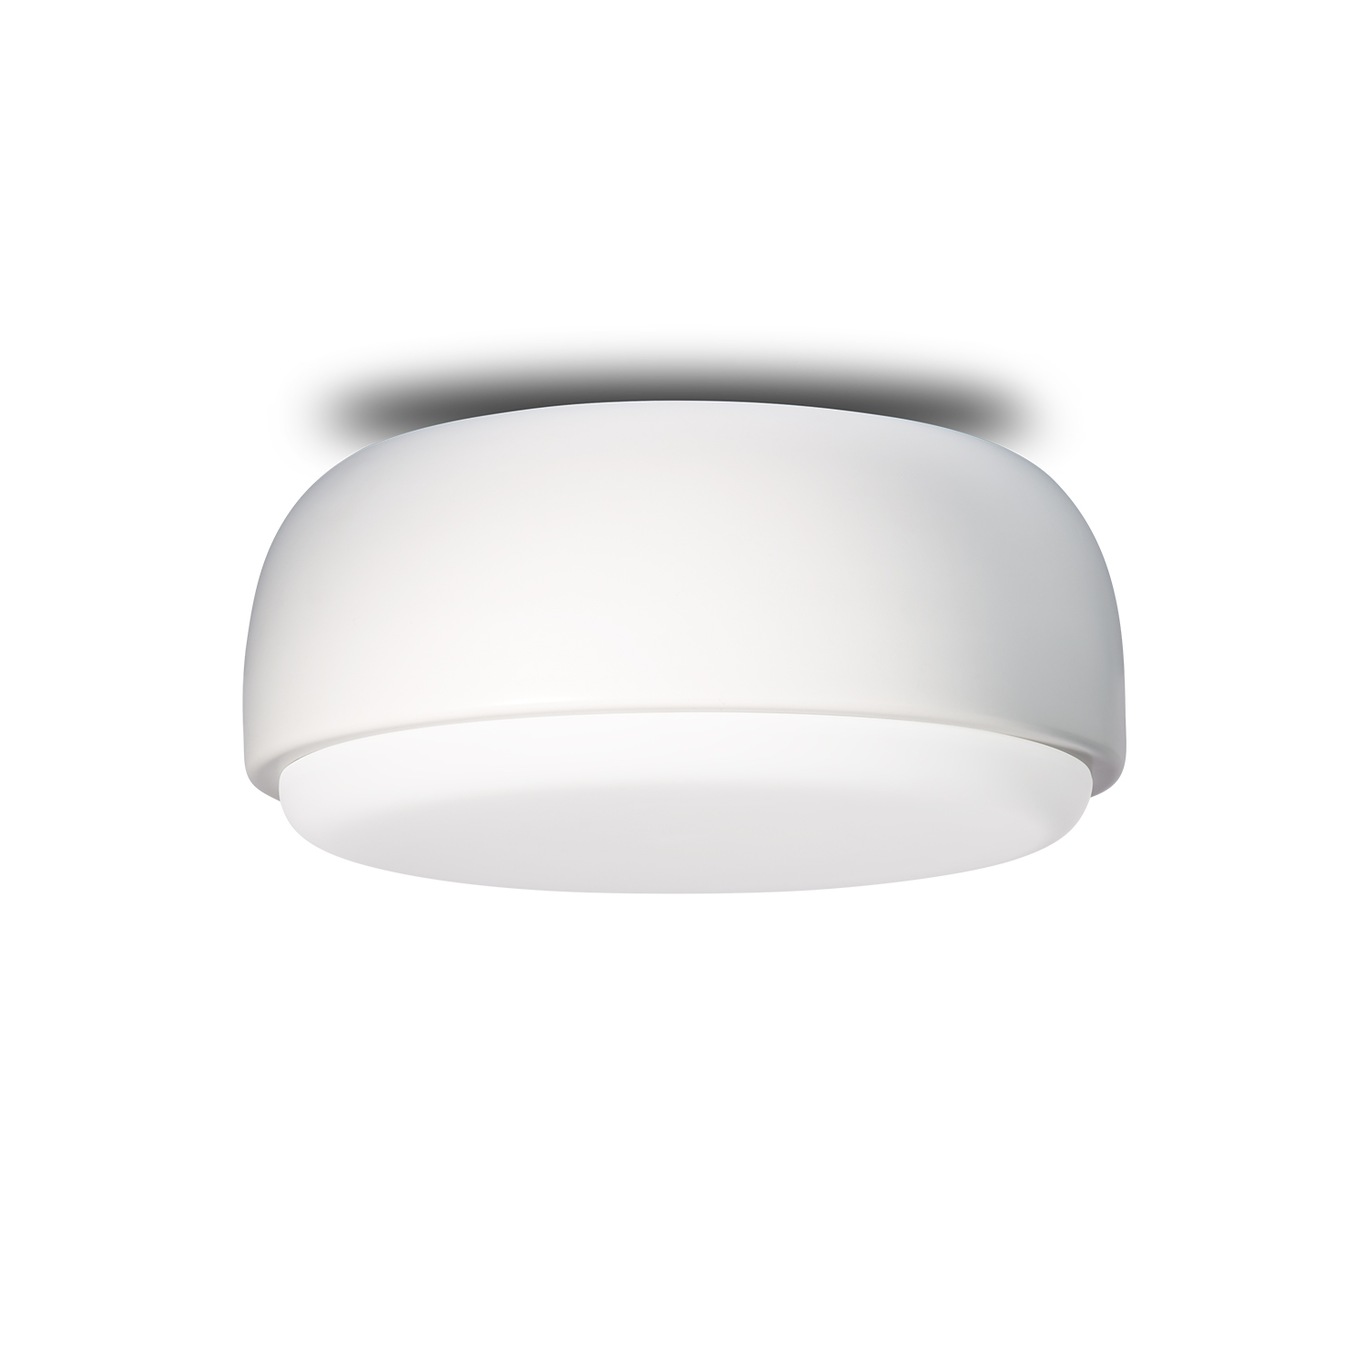 Over Me 30 Ceiling/Wall Lamp, White